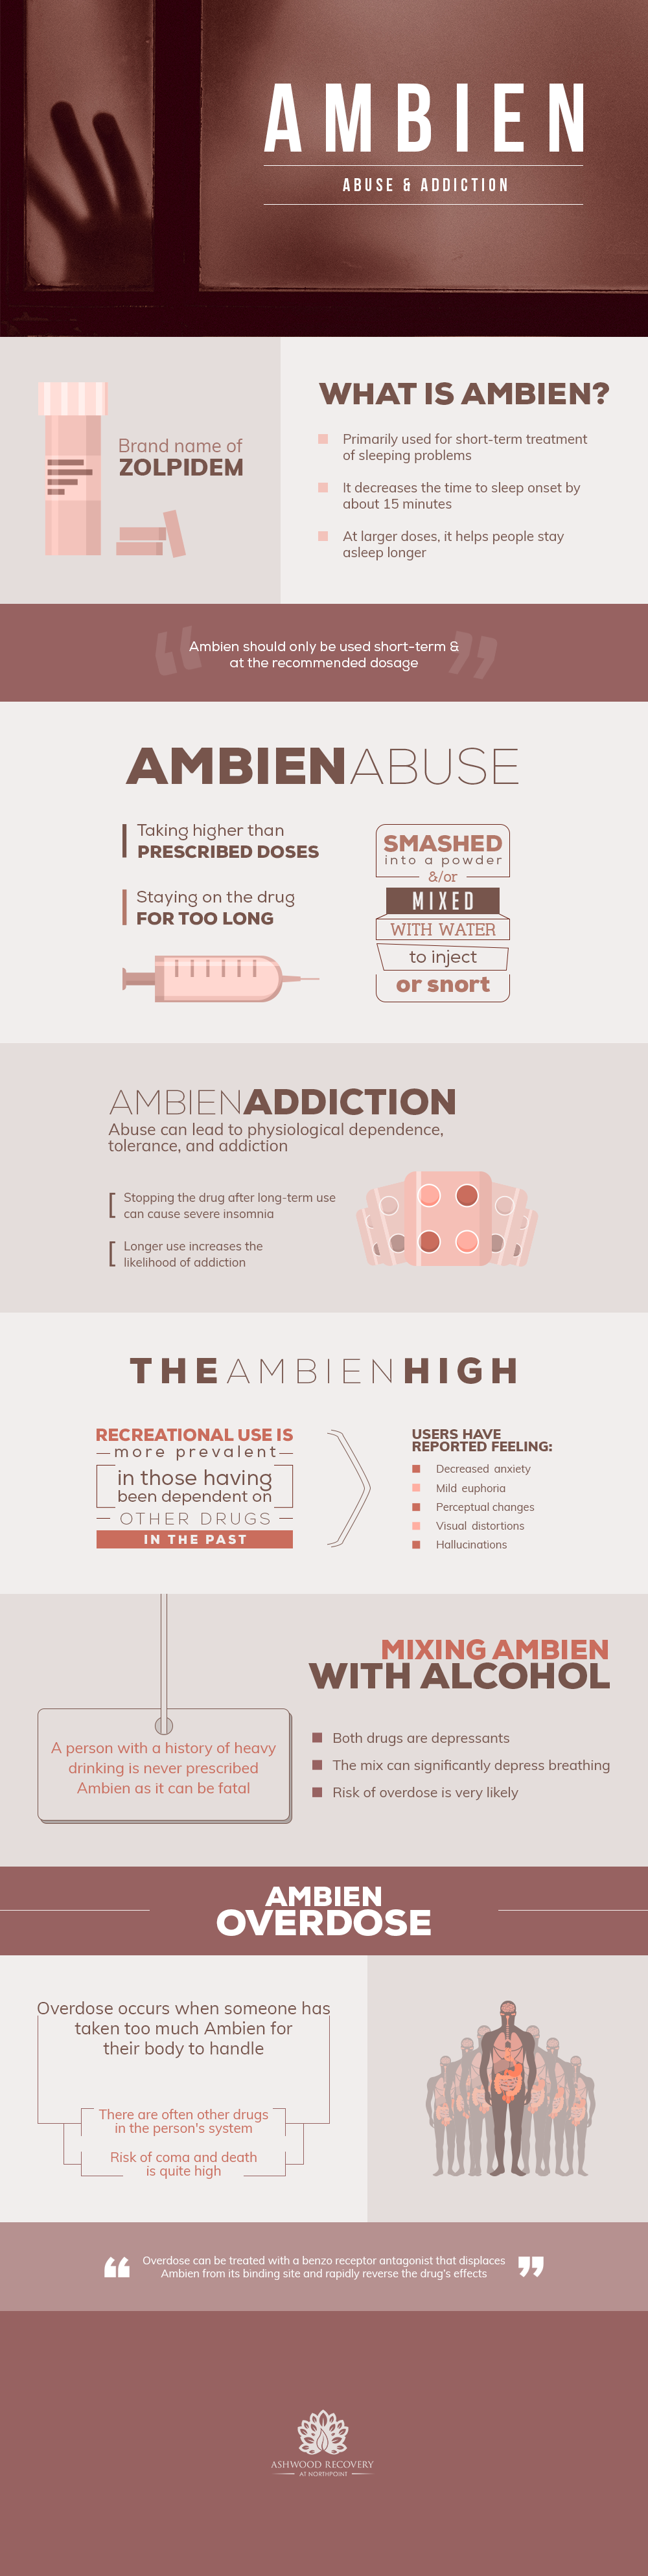 Ambien abuse and addiction. Ambien is primarily used for short term treatment of sleeping problems, it decreases the time to sleep onset by about 15 minutes and at larger doses, it helps people stay asleep longer. Ambien should only be used short term and at the recommended dosage. Signs of ambien abuse are taking higher than prescribed doses, staying on the drug for too long and smash the drug into a powder and/or mix with water to inject or snort. Abuse can lead to physiological dependence, tolerance, and addiction. Stopping ambien consumption after long-term use can cause severe insomnia and longer use of ambien increases the likelihood of addiction. Recreational use of ambien is more prevalent in those having been dependent on other drugs in the past, ambien users have reported feeling decreased anxiety, mild euphoria, perceptual changes, visual distortions and hallucinations. A person with a history of heavy drinking is never prescribed ambien as it can be fatal. both ambien and alcohol are depressants, mix of ambien with alcohol can significantly depress breathing. Mix alcohol with ambien can cause an overdose, is very likely an overdose happen to a person who mix alcohol with ambien. Ambien overdose occurs when someone has taken too much ambien for their body to handle, there are often other drugs in the system of the person, there is a high risk of coma and death. Overdose can be treated with a benzo receptor antagonist that displaces ambien from its binding site and rapidly reverse the effect of the drug